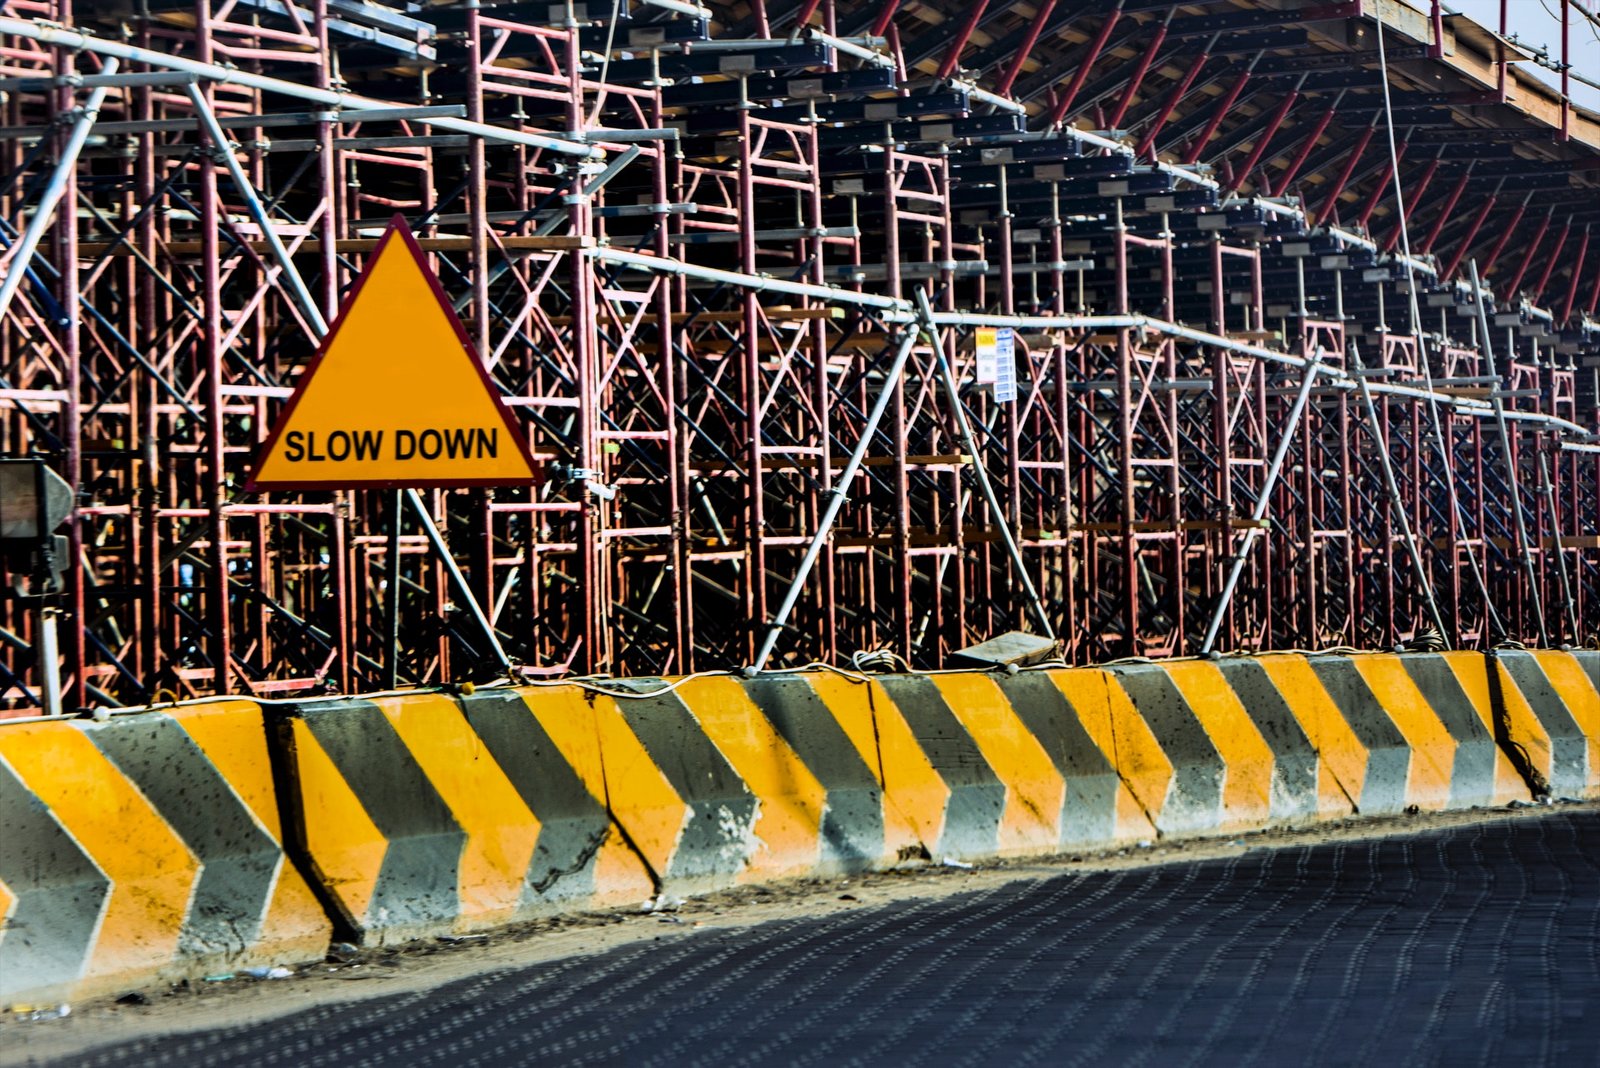 A construction site with a "Slow Down" sign. Slowing down is an important part of tapering and recovering.